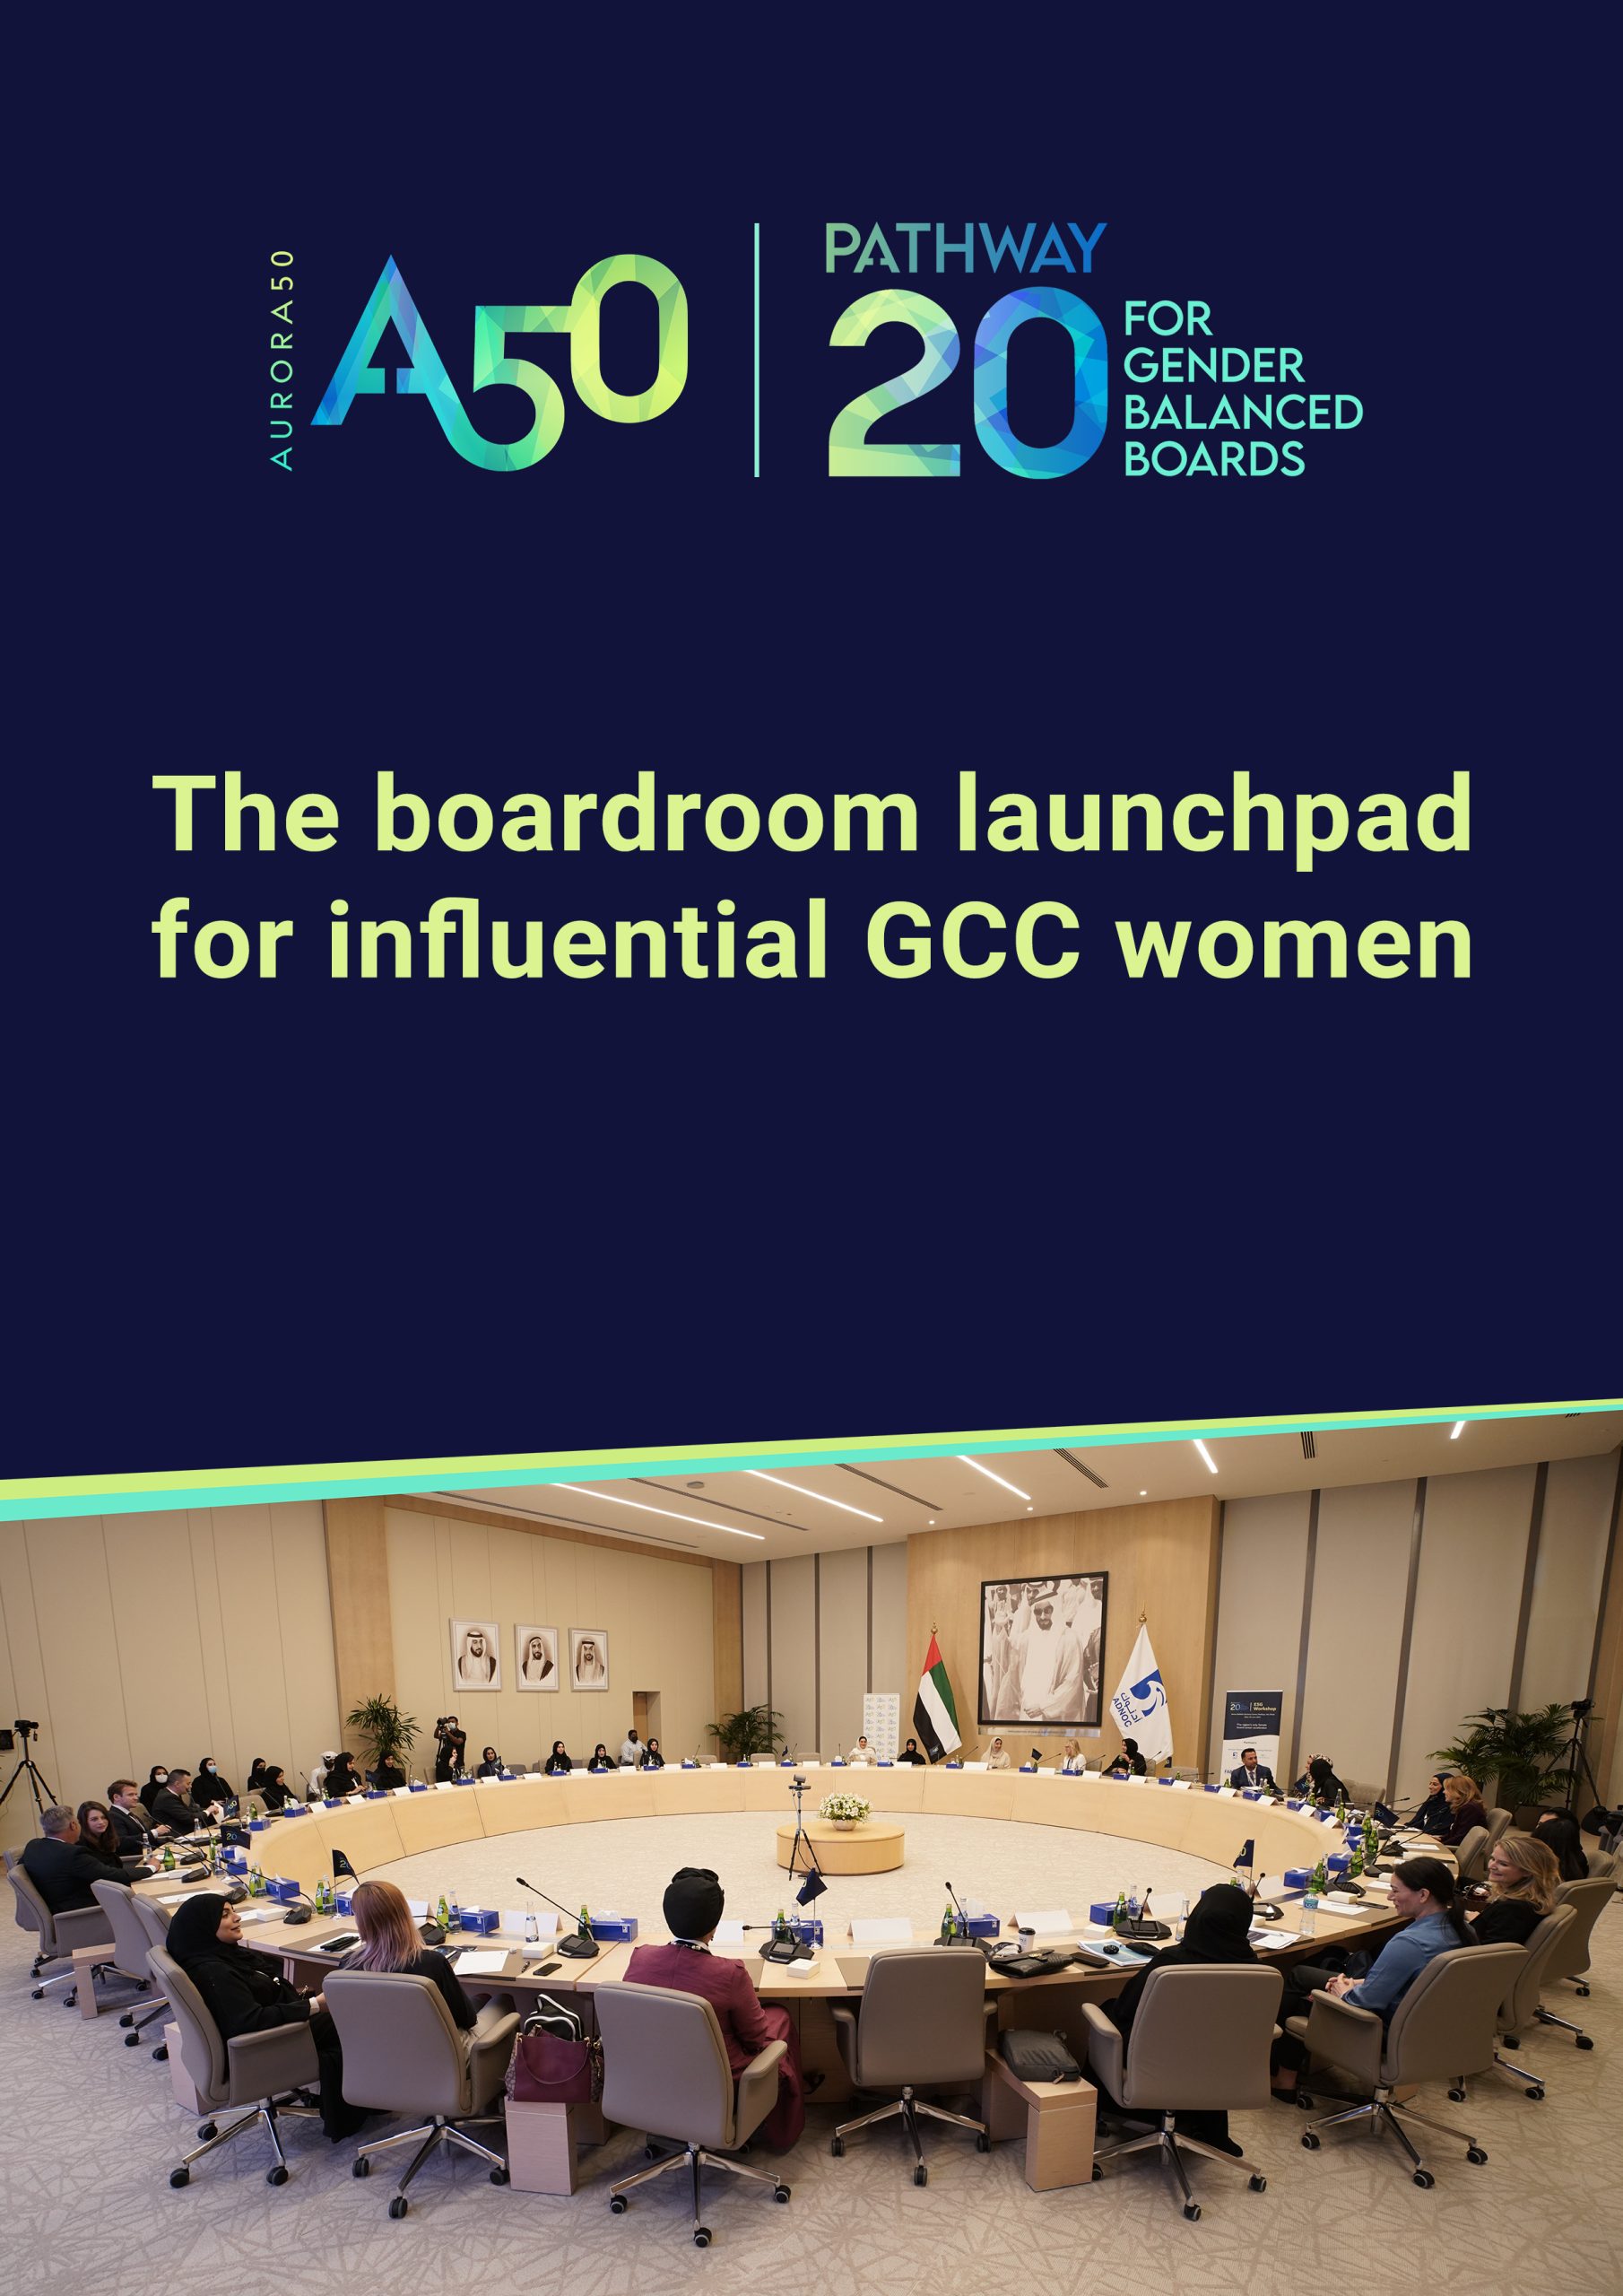 Cover image of Aurora50's Pathway20 brochure - The boardroom launchpad for influential GCC women